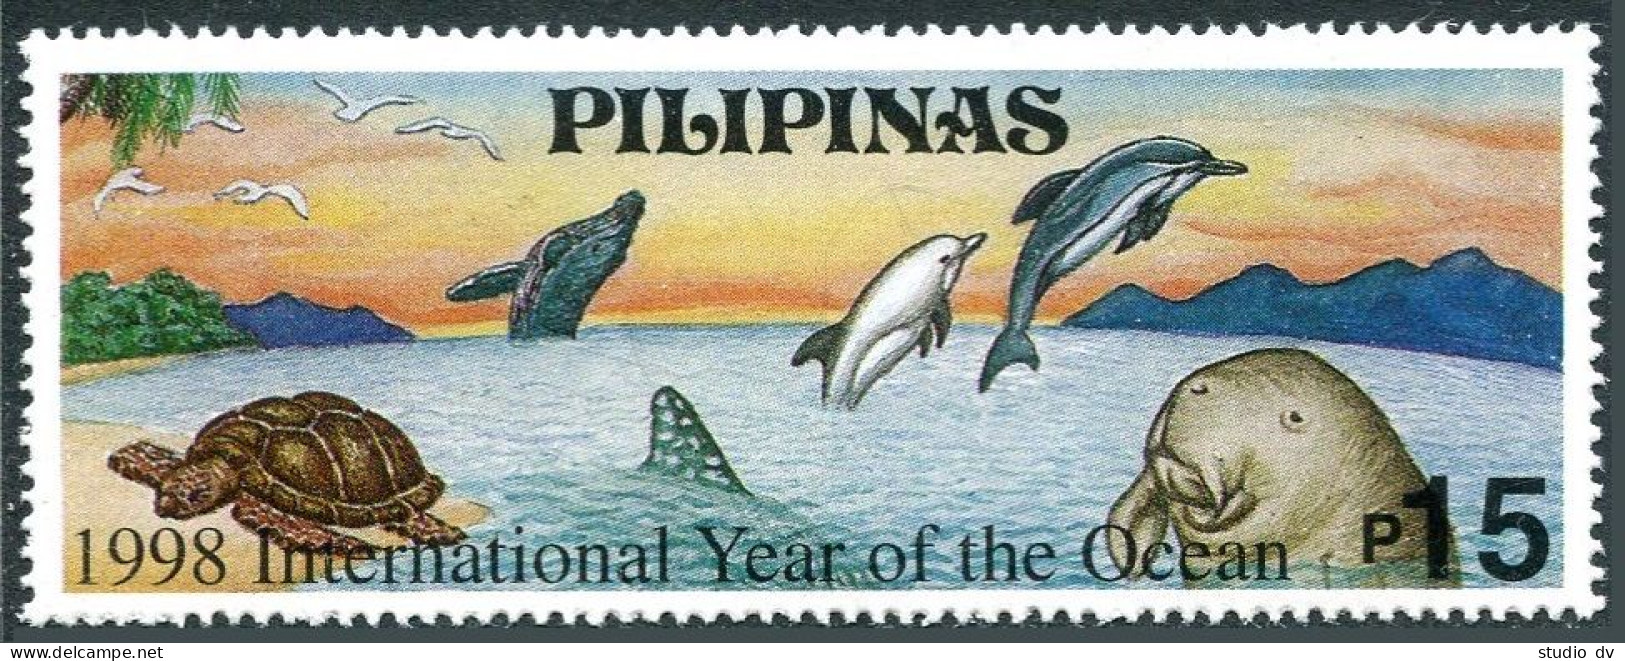 Philippines 2554, MNH. Year Of The Ocean-1998. Seals, Turtle. - Philippinen